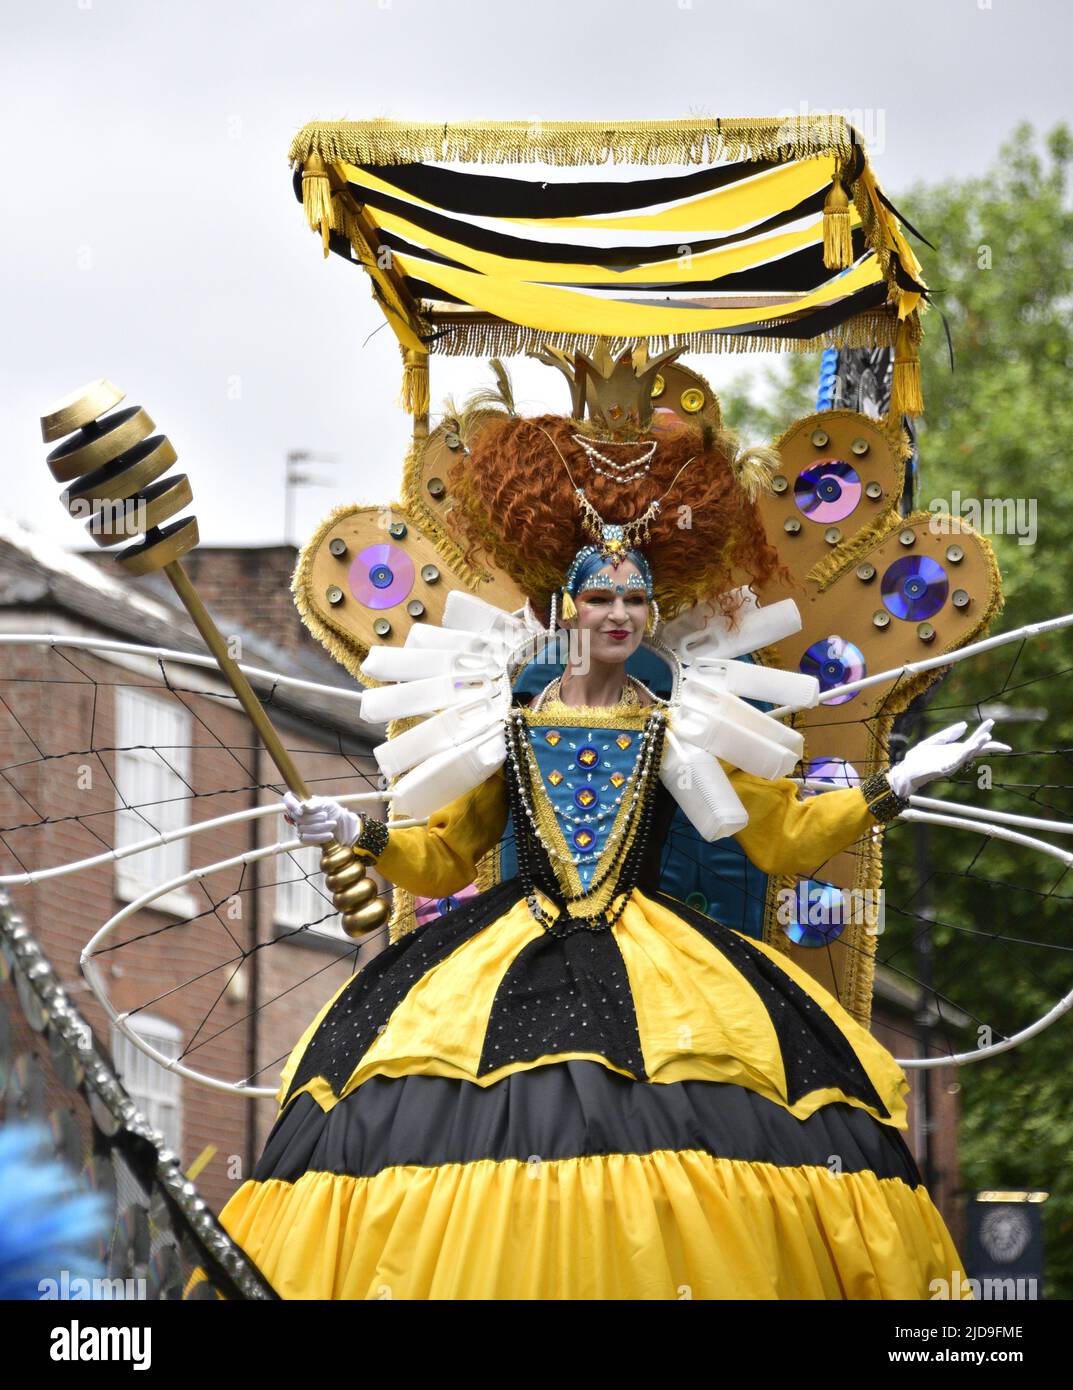 Manchester, UK, 19th June, 2022. The Queen Bee float. Performers and artists take part in the Manchester Day Parade, Manchester, England, United Kingdom. Organisers say: 'Over 1,500 performers and artists from local communities bring Manchester city centre to life in a fantastic display of colour, sound and movement. An audience of more than 60,000 are wowed by the incredible day of amazing structures, vibrant costumes and pulsating music and dance'. Credit: Terry Waller/Alamy Live News Stock Photo